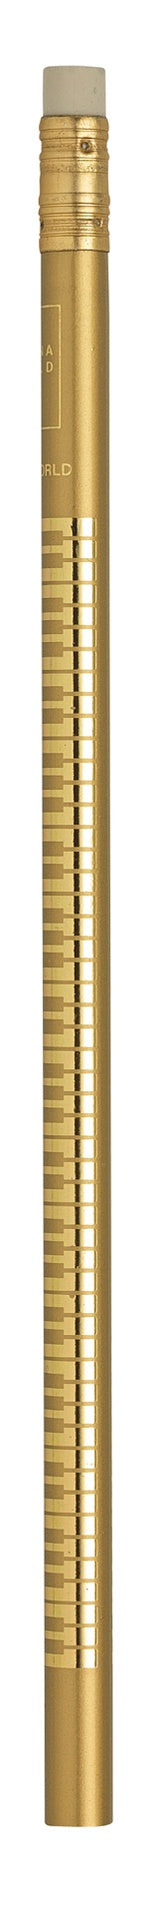 Pencil Gold with Gold Keyboard